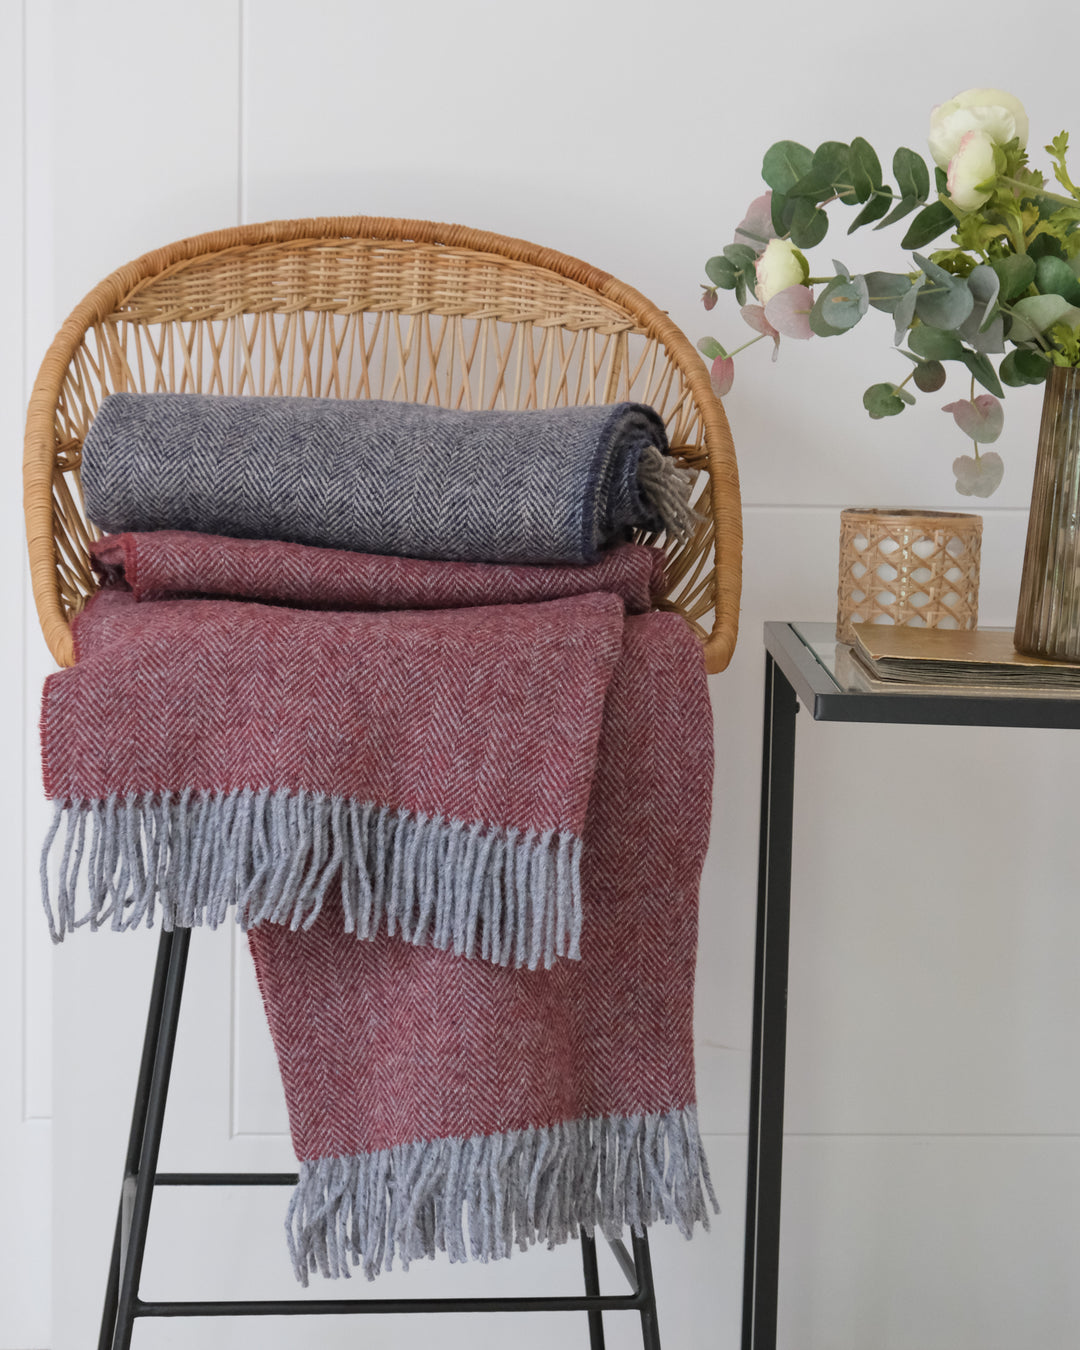 Stack of Cashmere and Merino Recycled Wool Blankets on a chair by Turtle Doves for The British Blanket Company